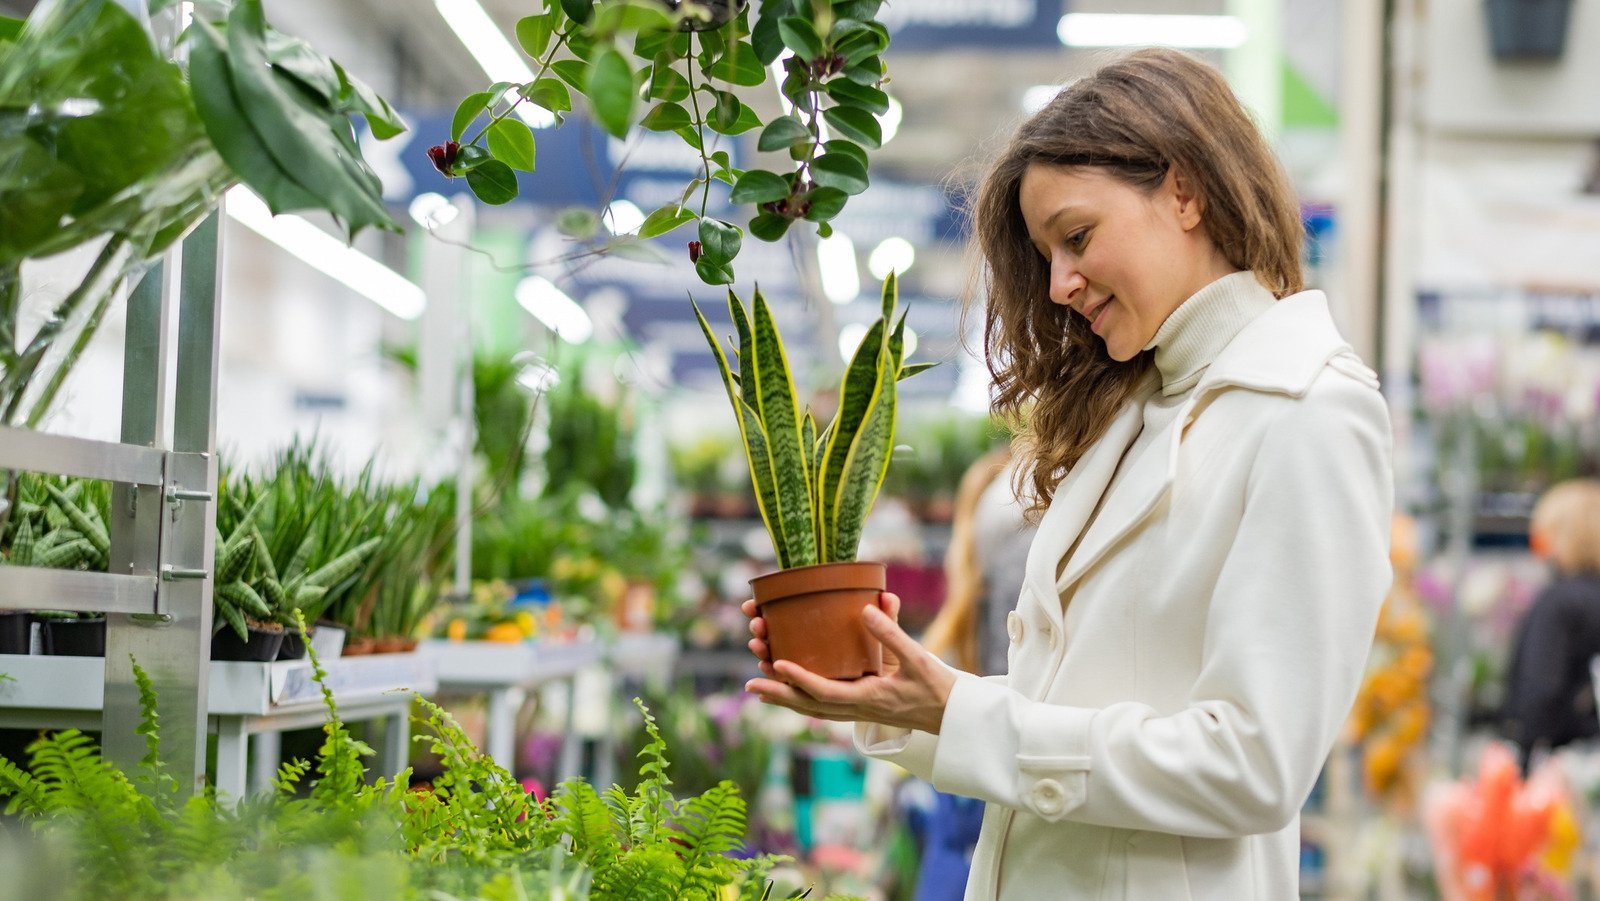 The Unexpected Houseplant Trend Taking Over 2022